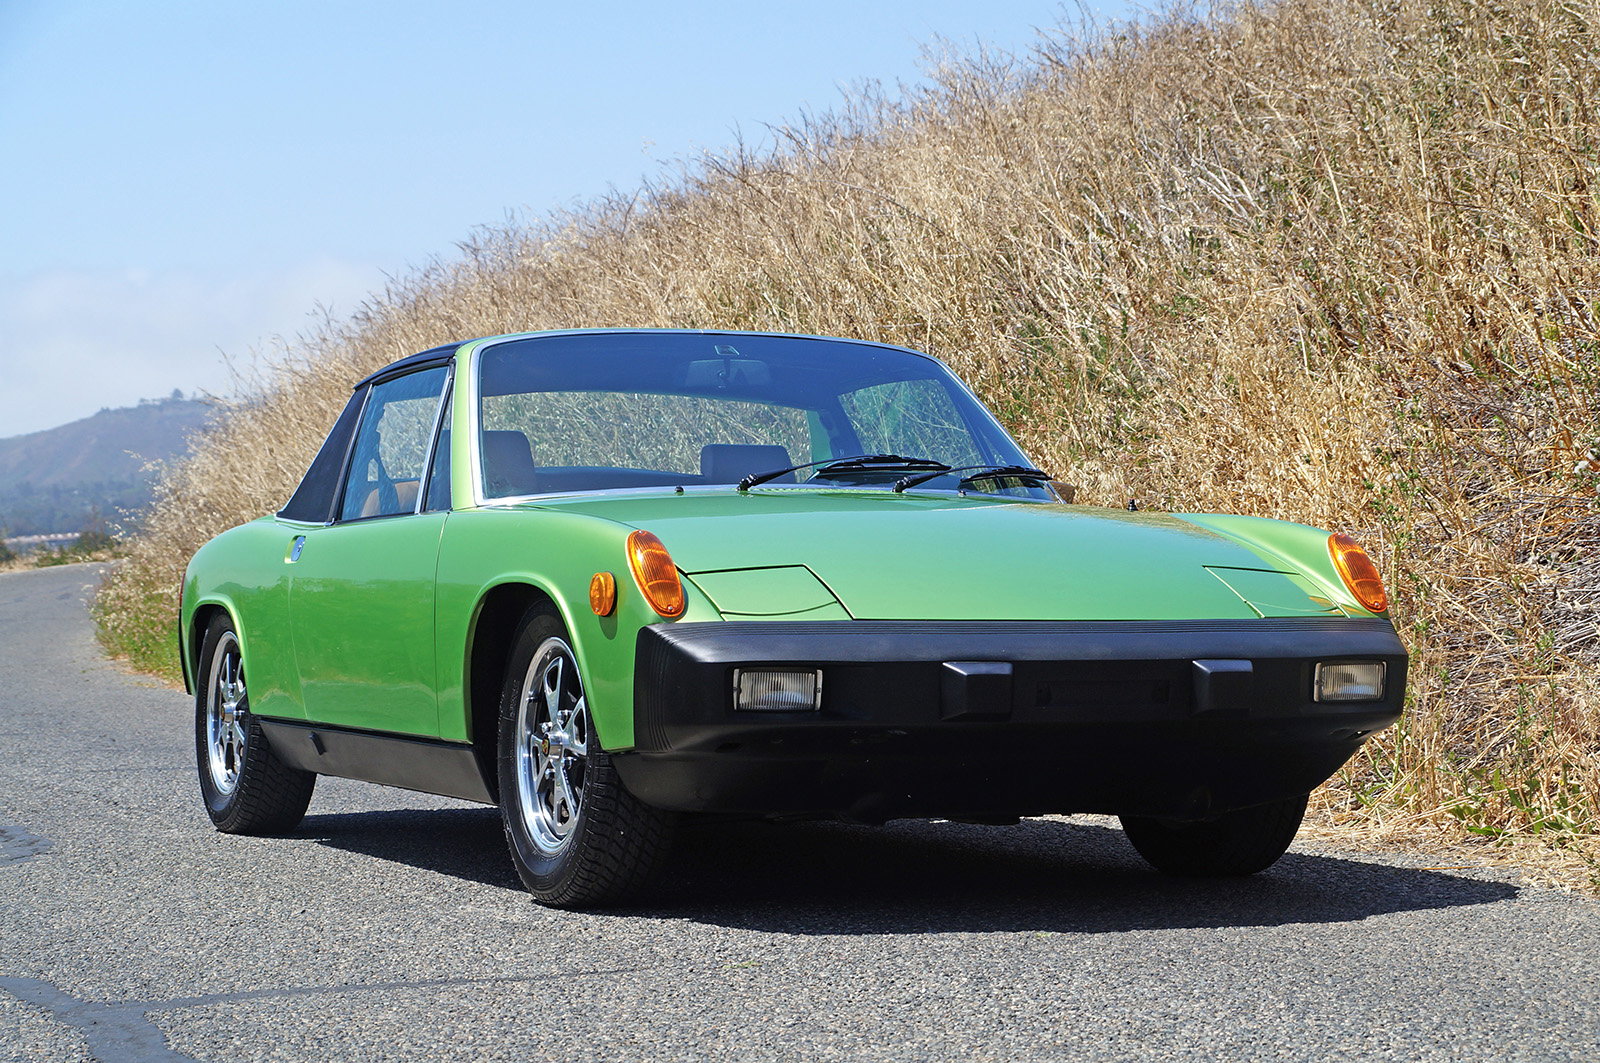 1976 Porsche 914 - 1976 Porsche 914 2.0 - Lime Green Metallic, Extremely Clean, Dry, CA Example - Used - VIN 4762902060 - 103,950 Miles - 4 cyl - 2WD - Manual - Other - Santa Barbara, CA 93105, United States